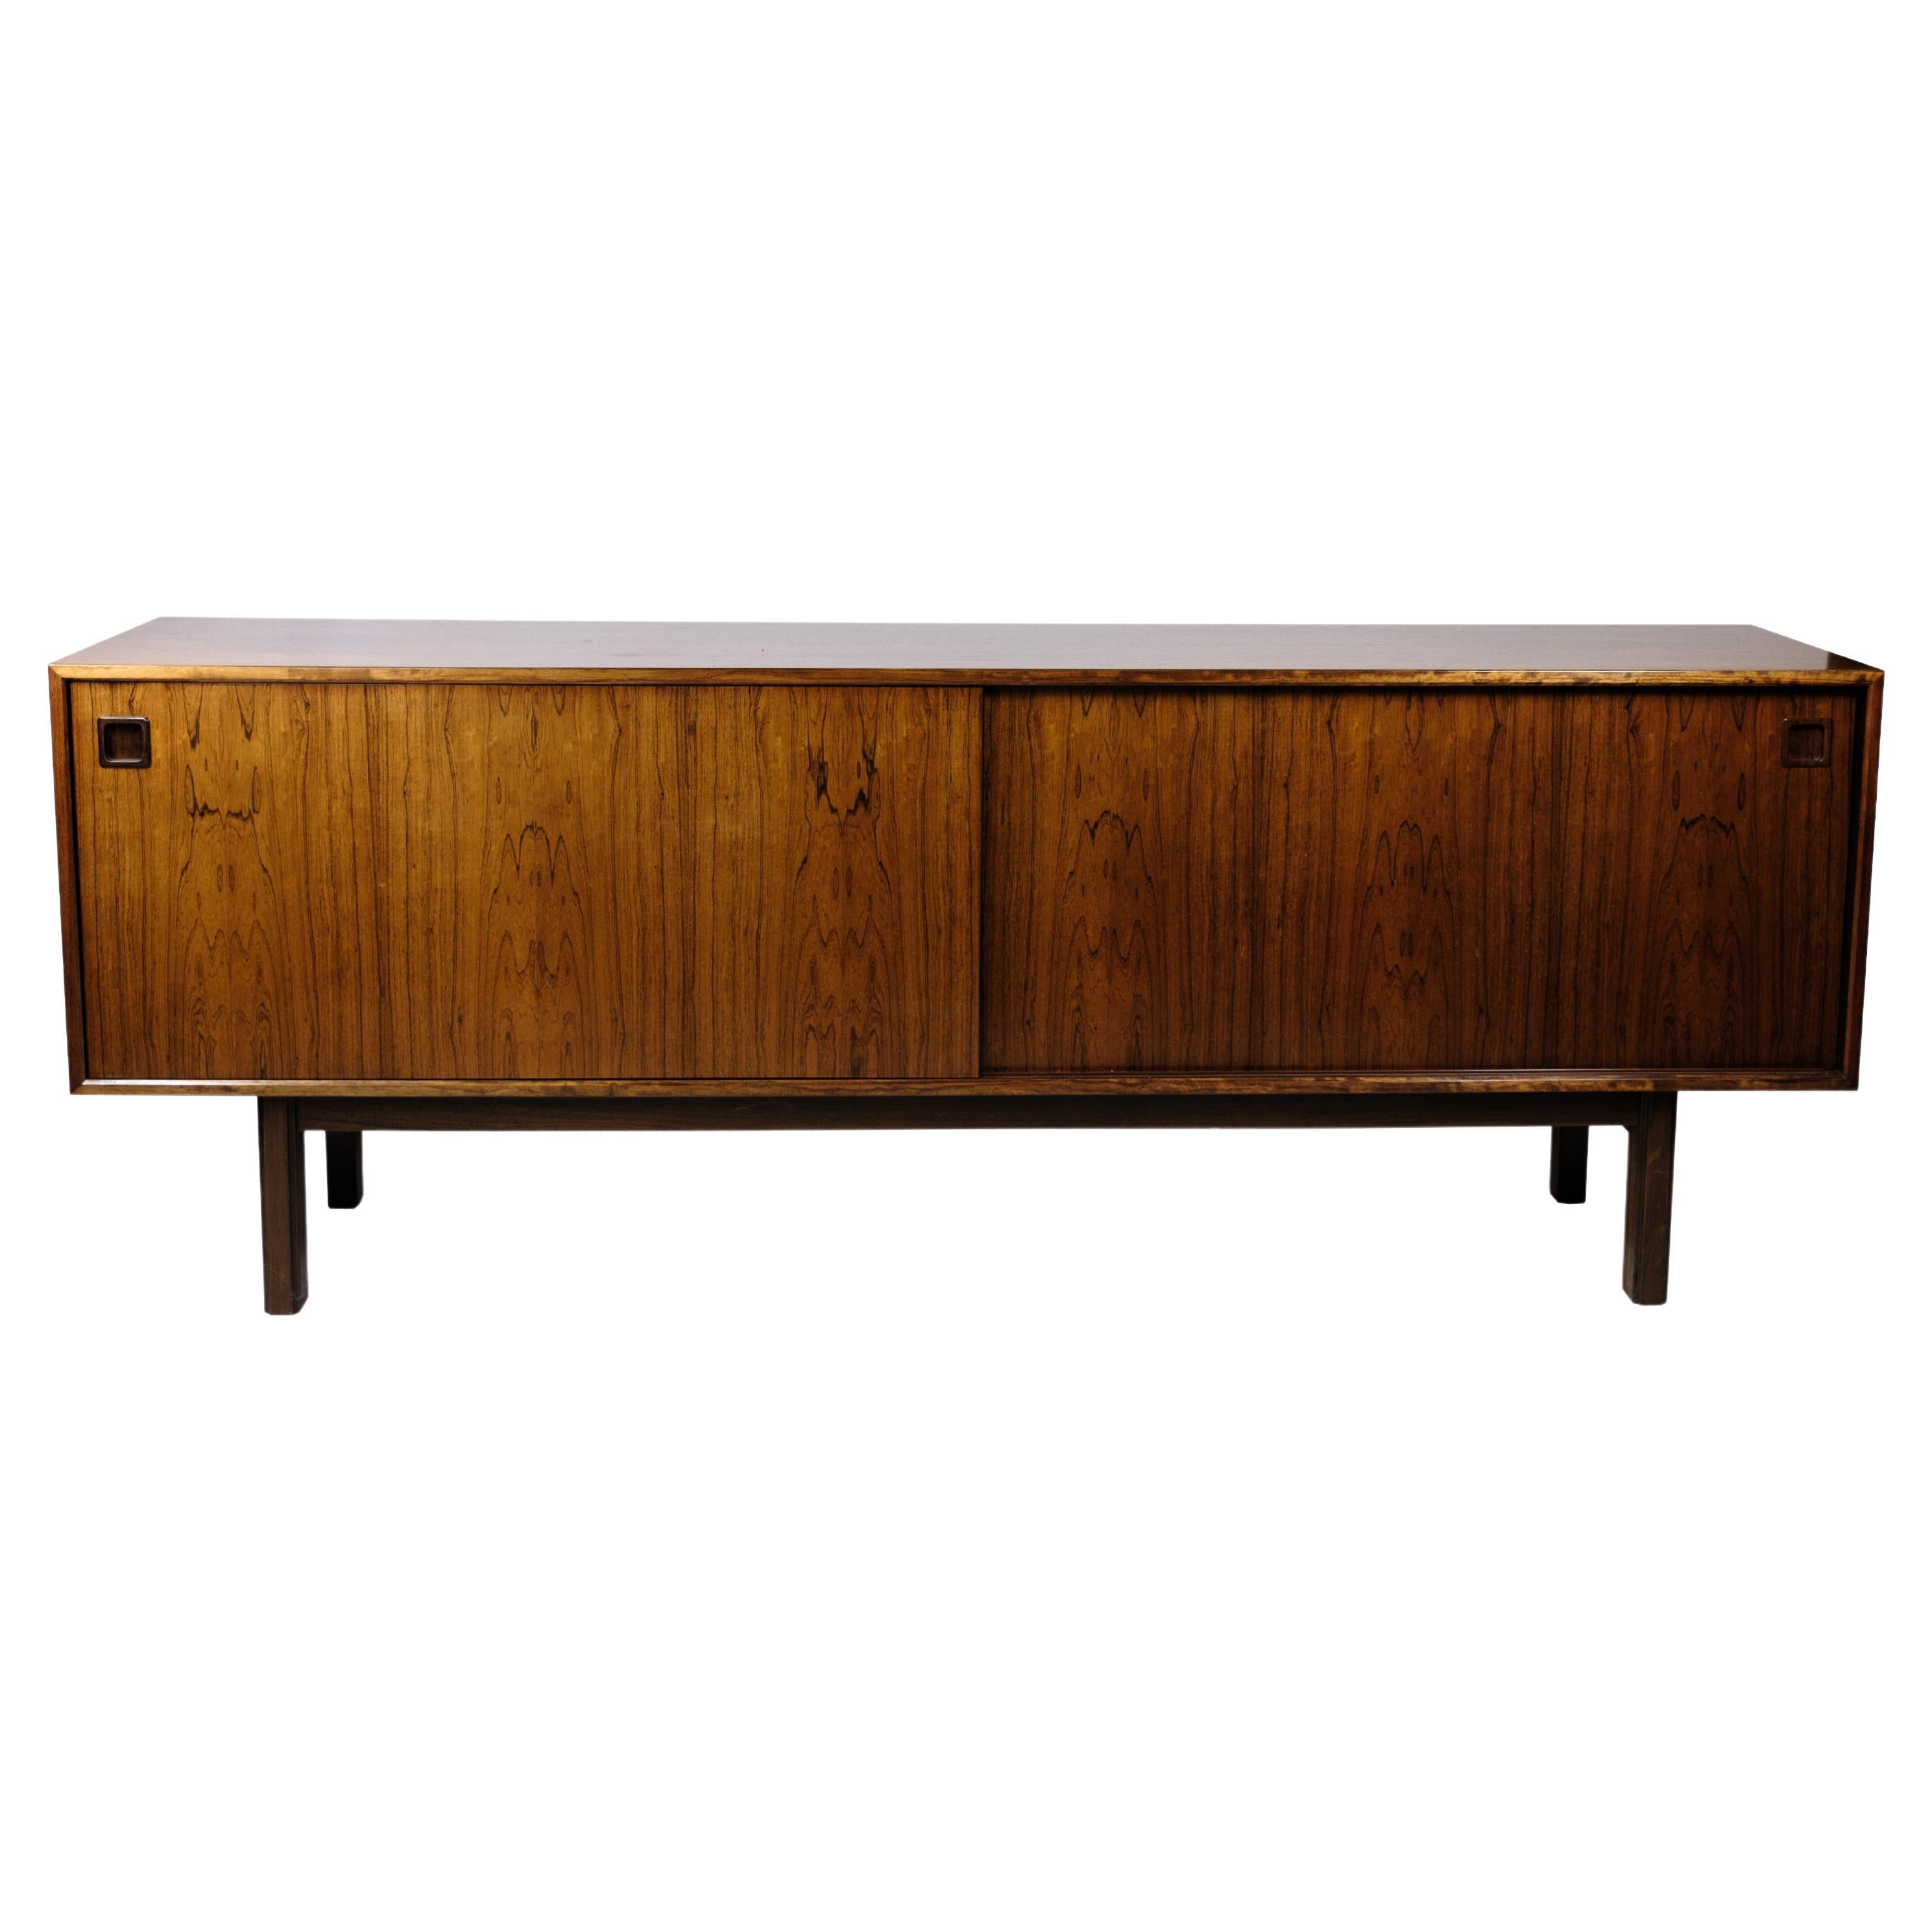 Low Sideboard By Omann Junior Made In Rosewood, Danish Design From 1960s For Sale